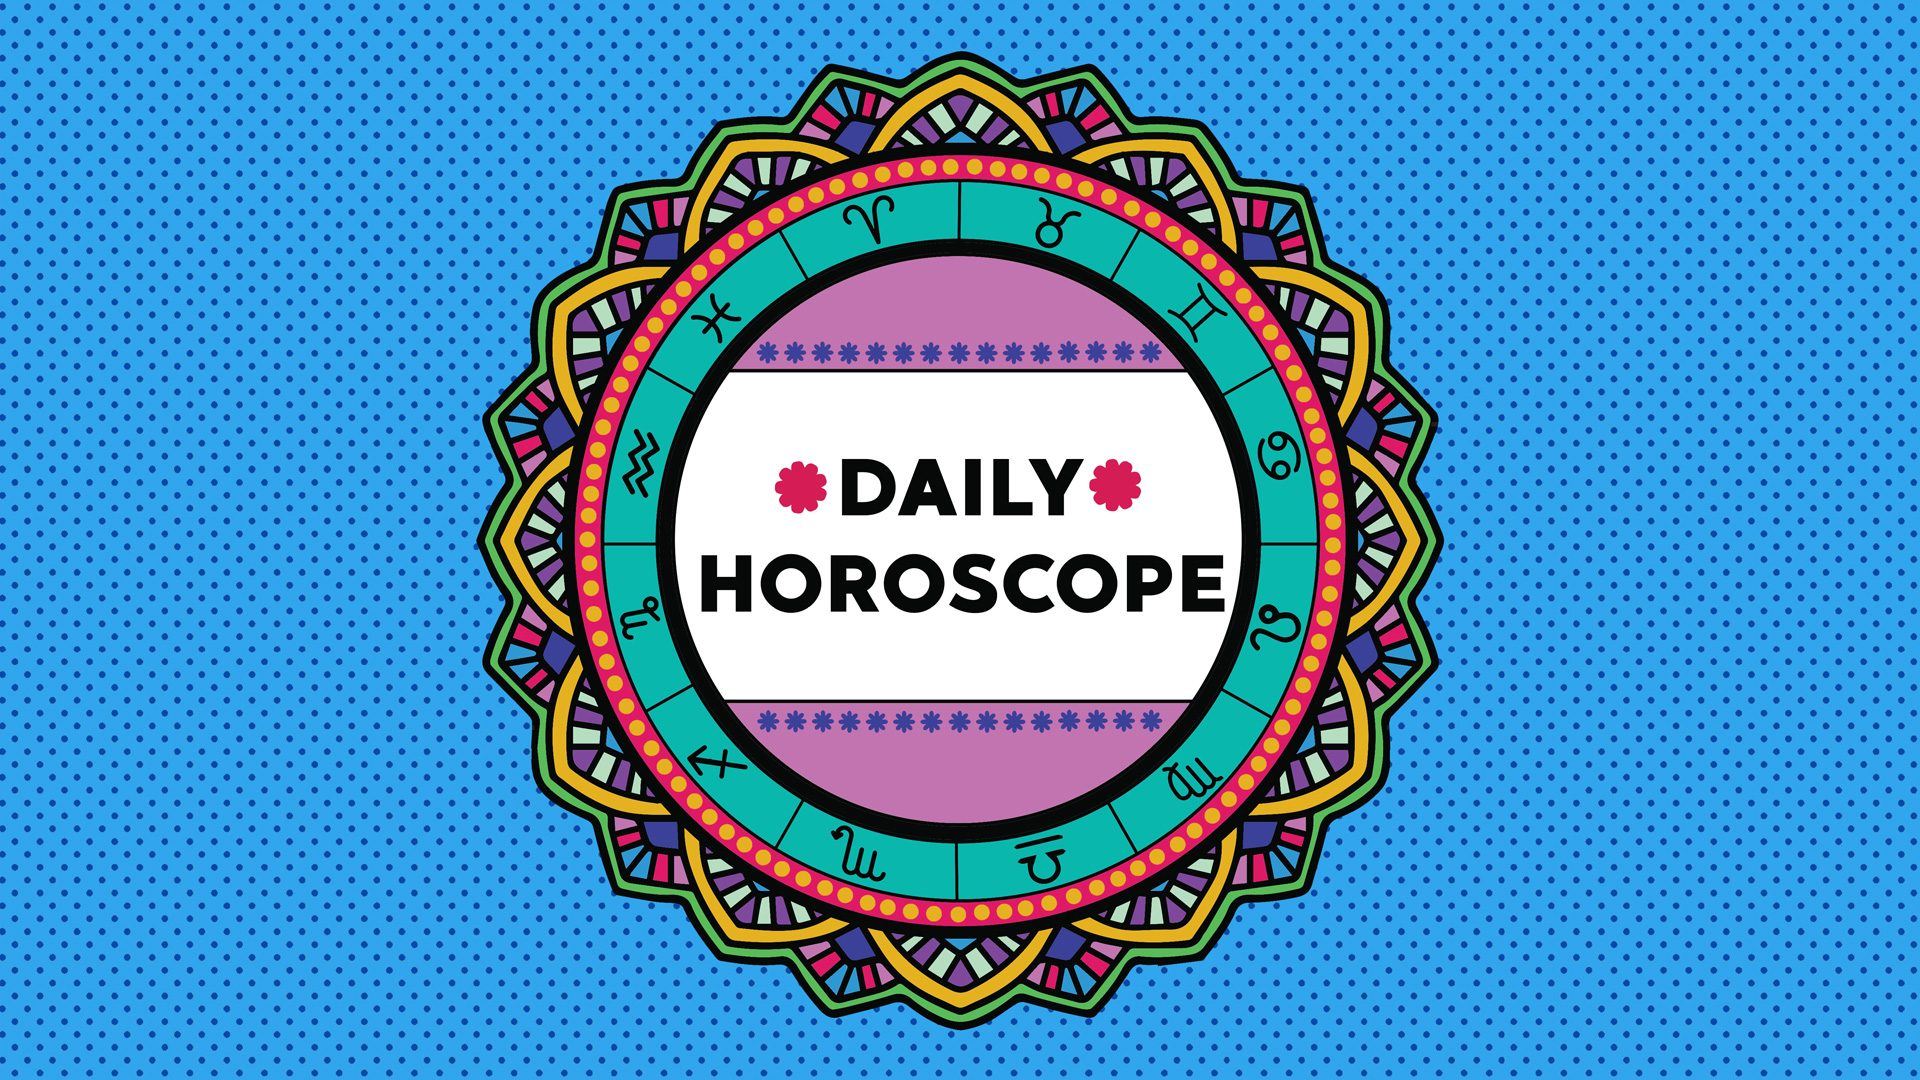 Daily Horoscope (Today & Tomorrow): Predictions for Love, Health & Financial with 12 Zodiac Signs